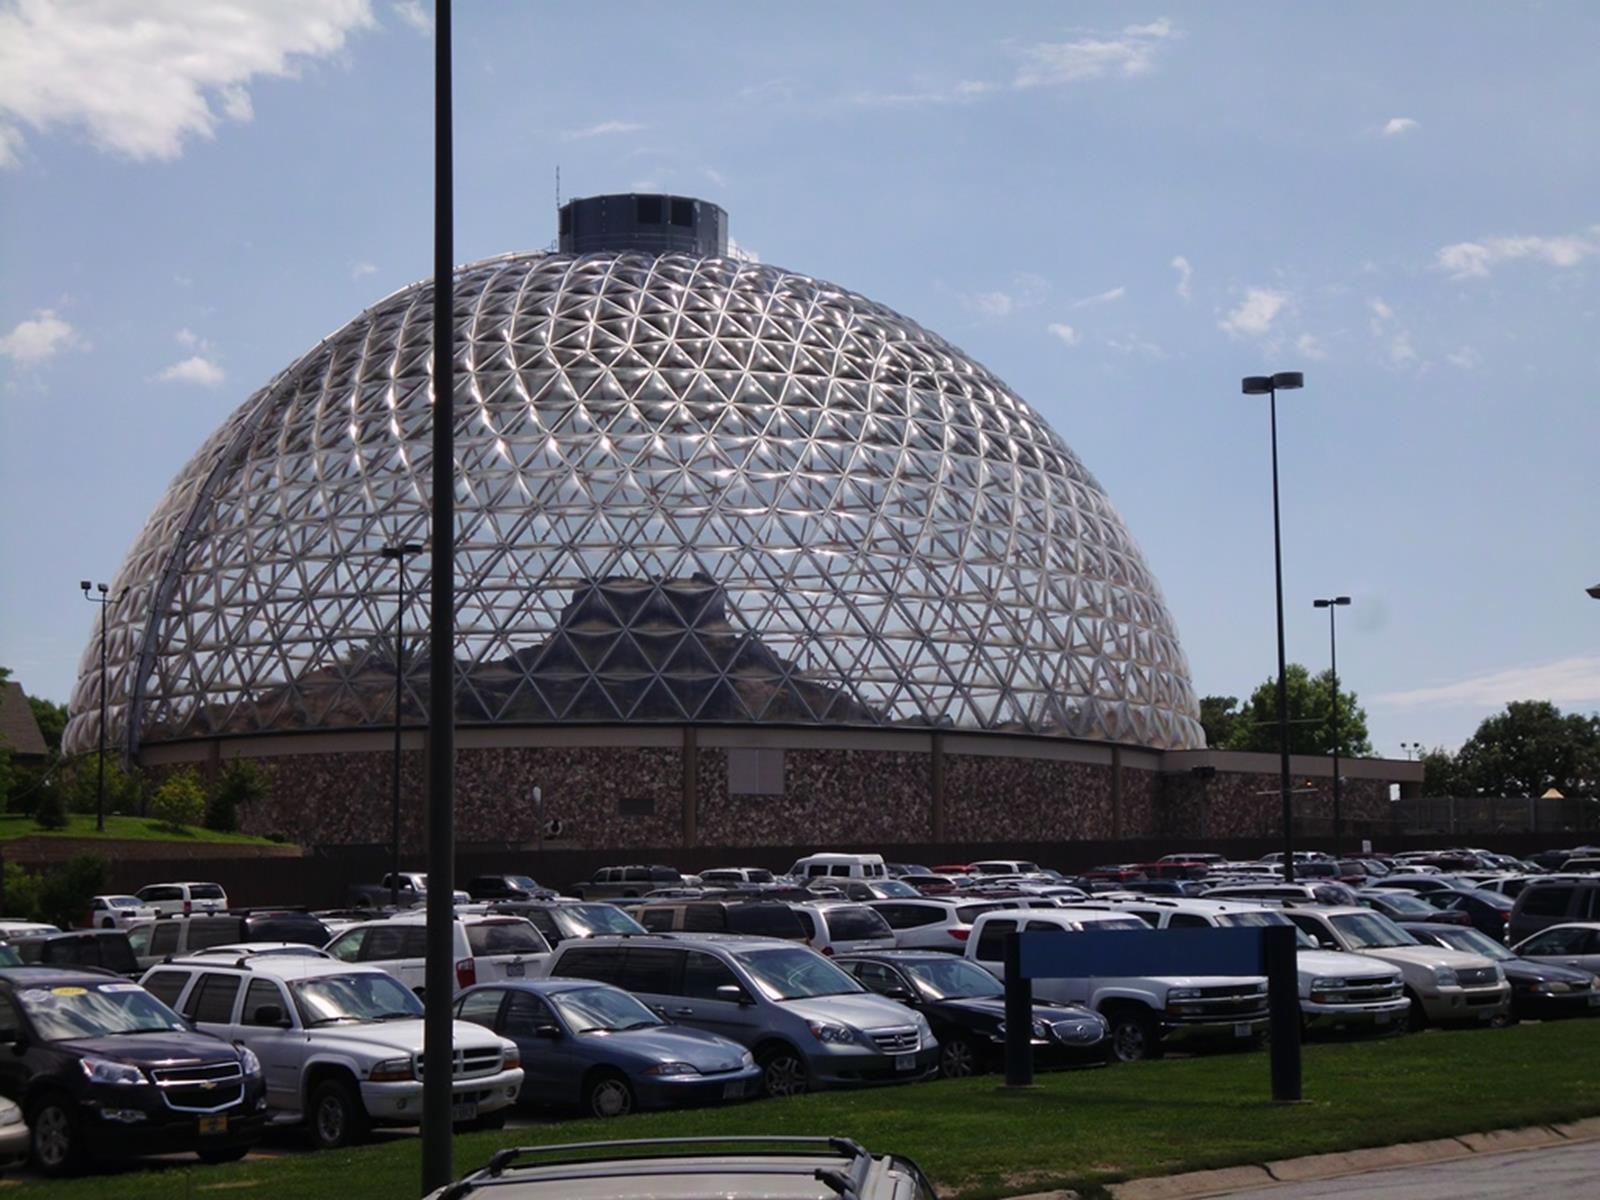 The outside of the Desert Dome. Credit: Dual Freq at en.wikipedia